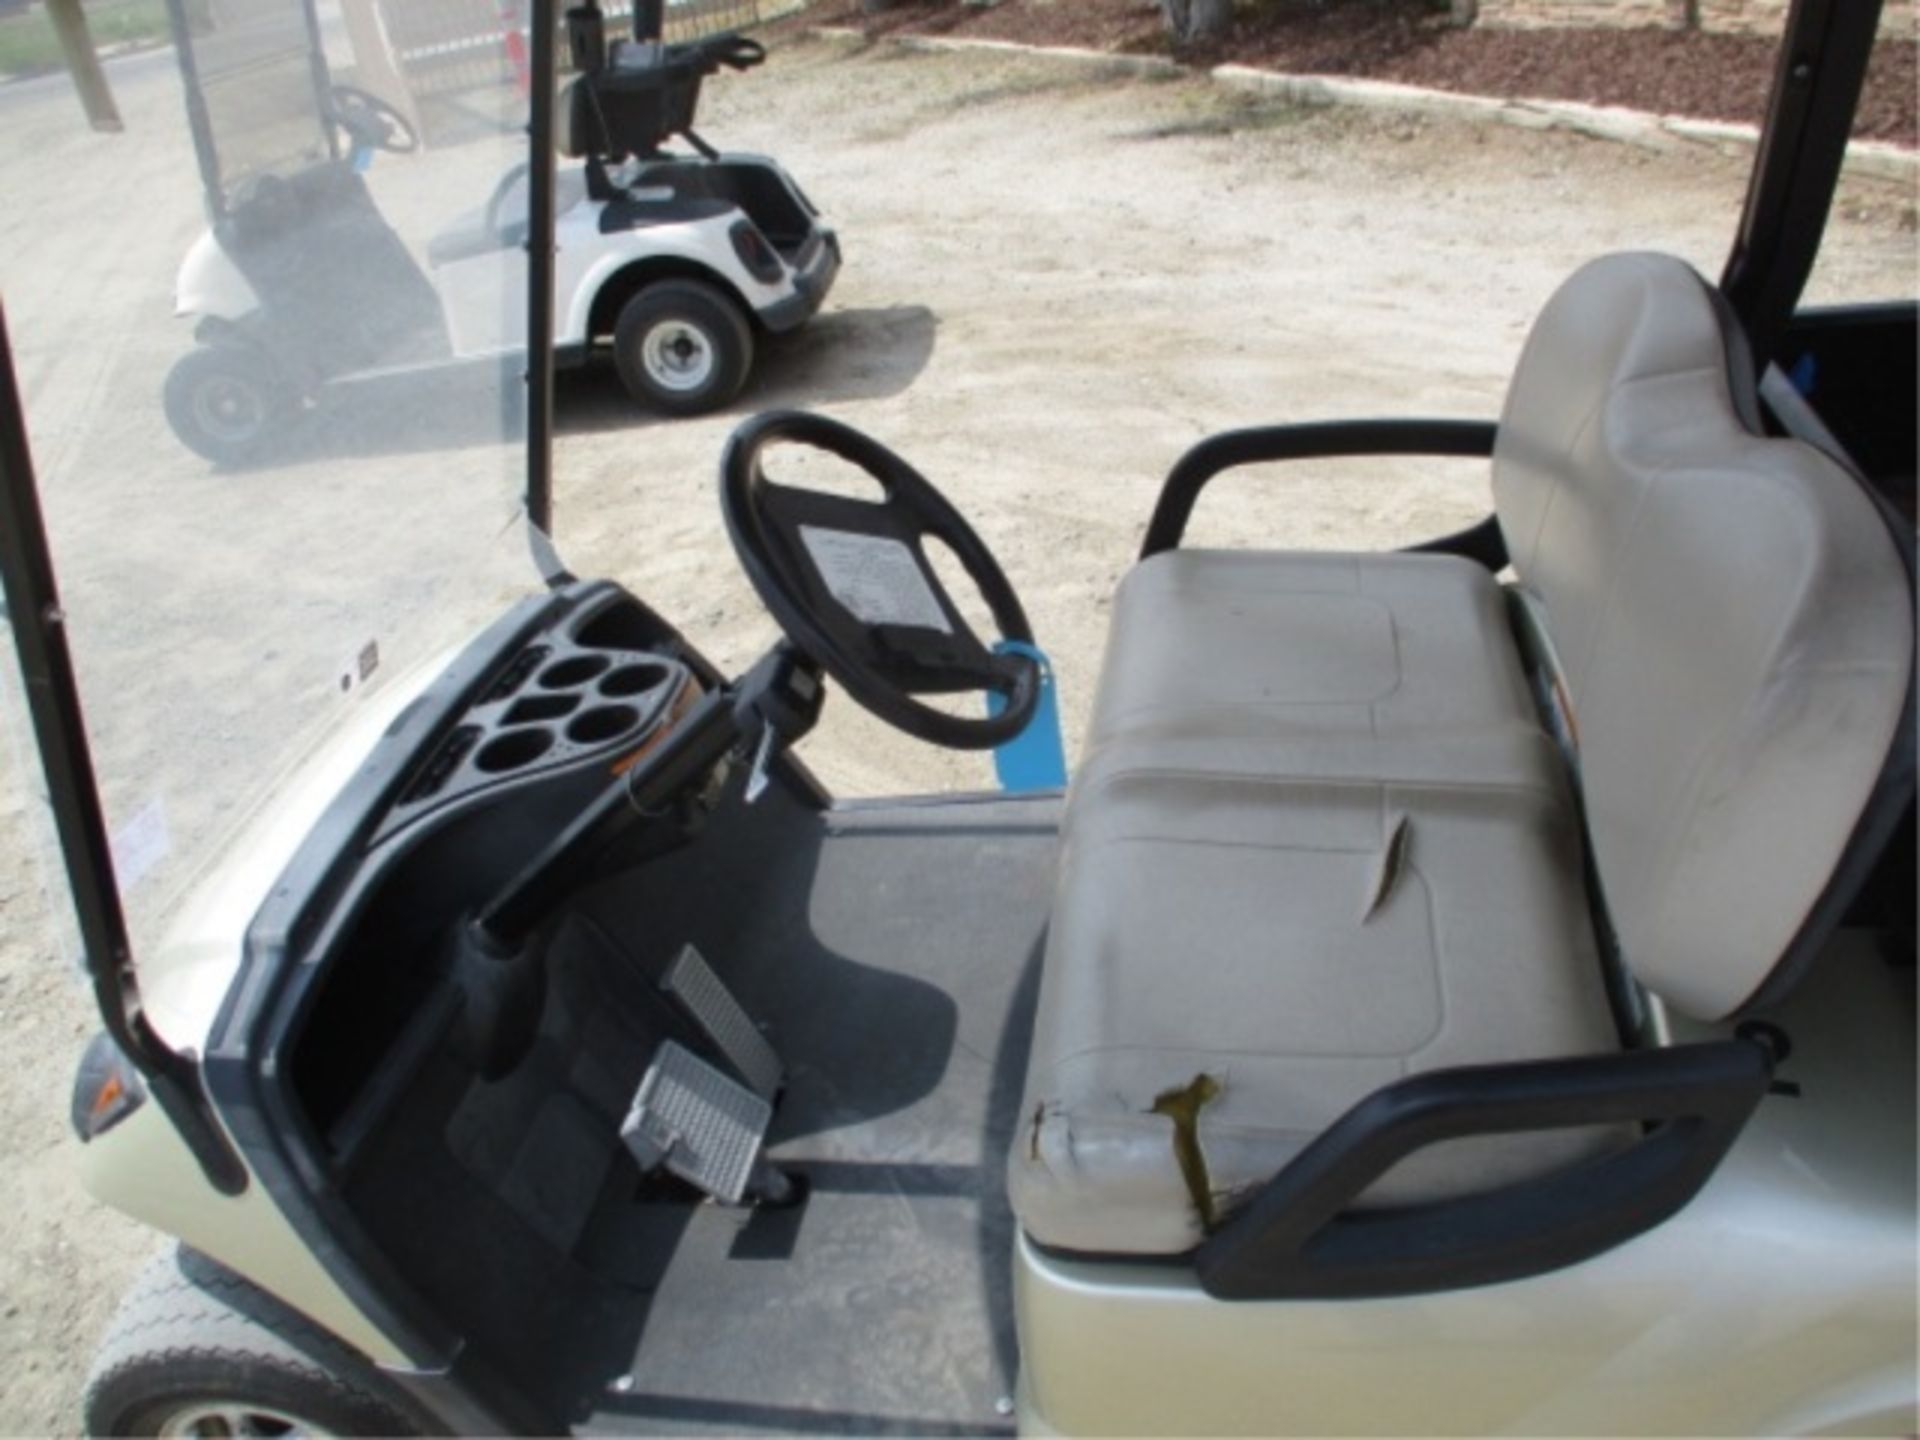 Yamaha Utility Golf Cart, Electric, Rear Metal Bed, Canopy, Includes Charger, S/N: JW1-F423610 - Image 14 of 24